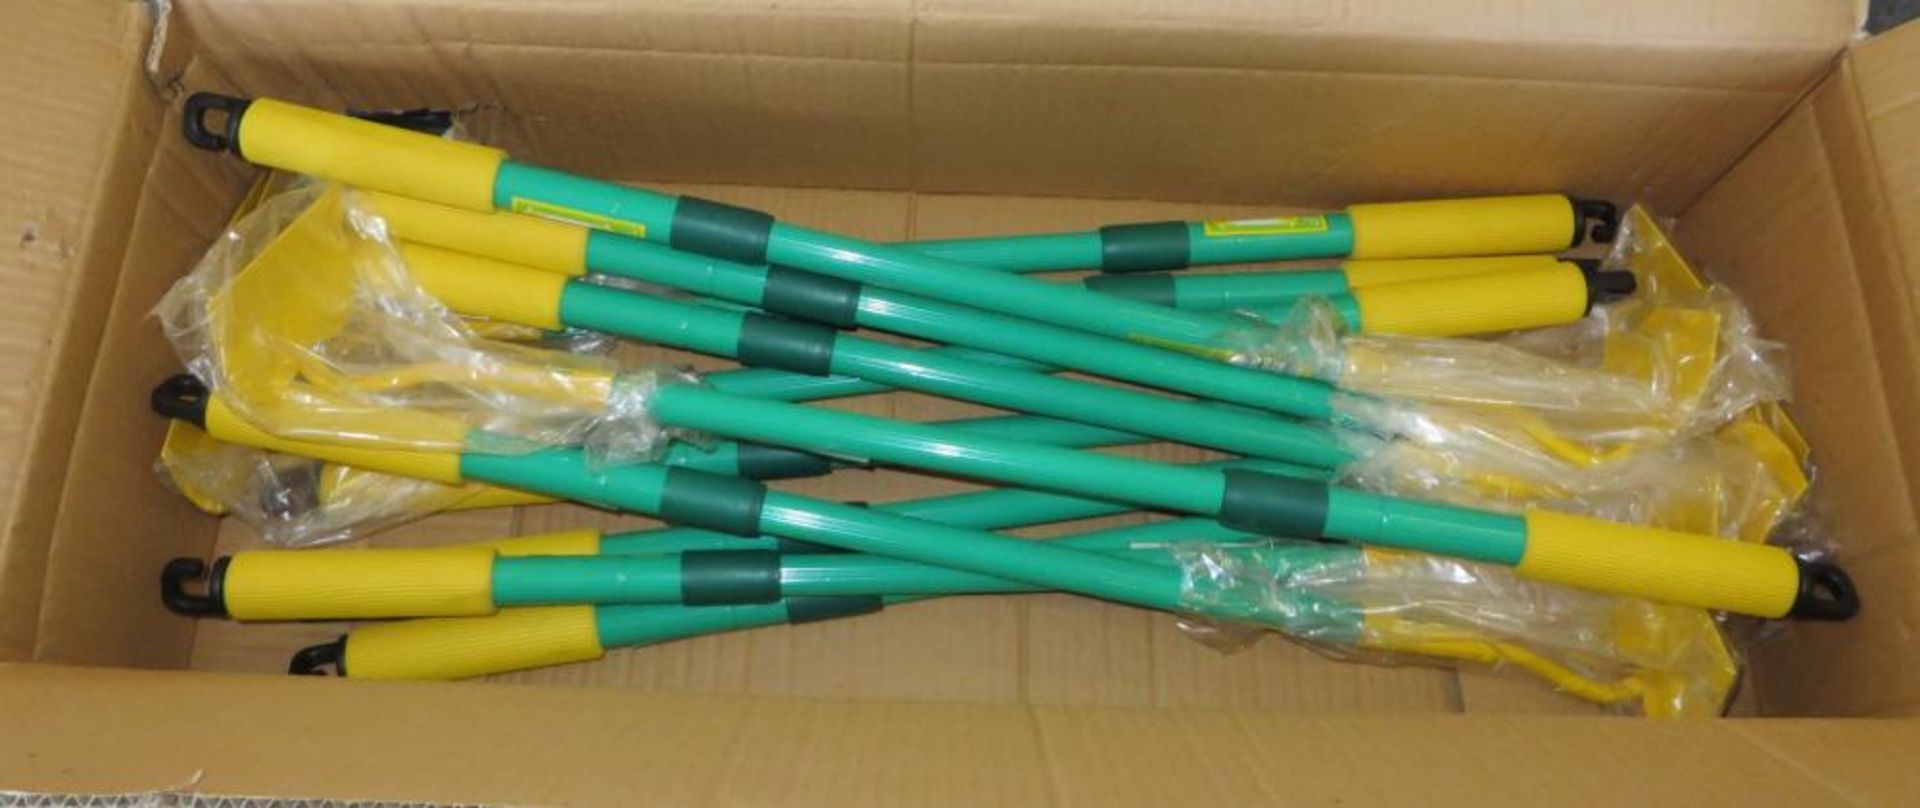 12 x Educational Infant Telescopic Hoes - New - CL185 - Ref: DRT0655 - Location: Stoke ST3 - Image 2 of 4